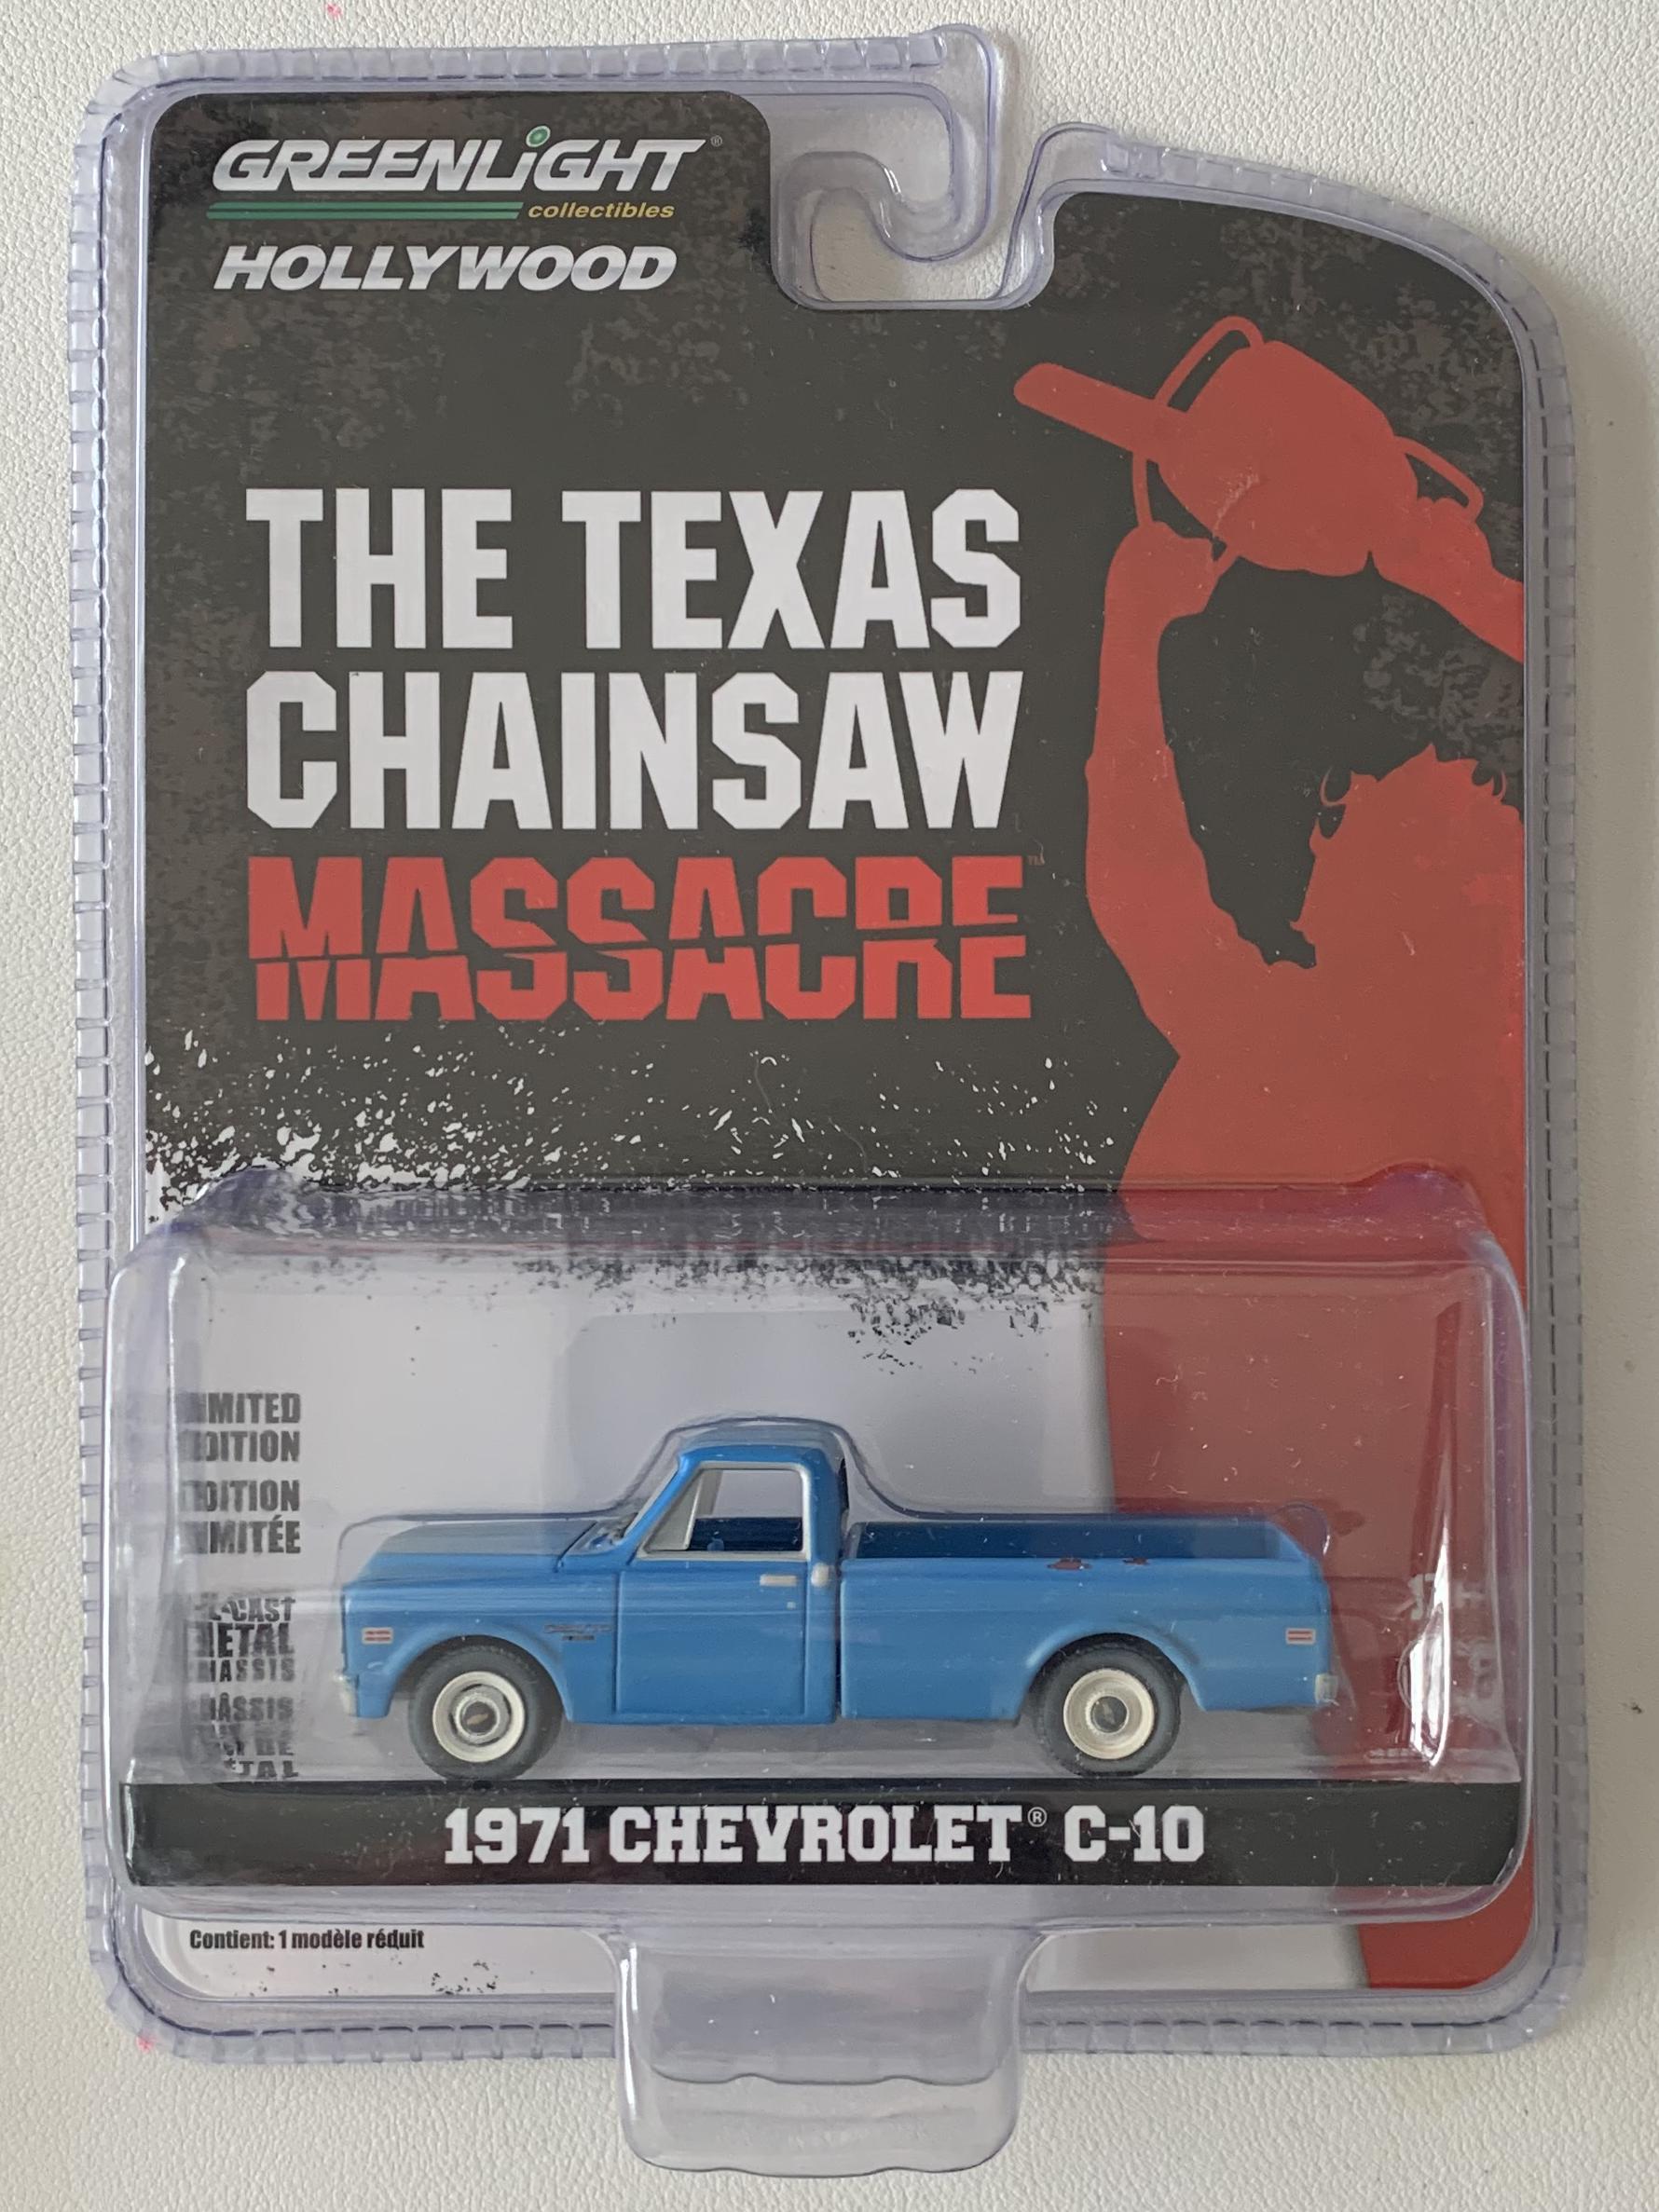 The Texas Chainsaw Massacre 1971 Chevrolet C-10 in blue 1:64 scale model from Greenlight Hollywood, limited edition